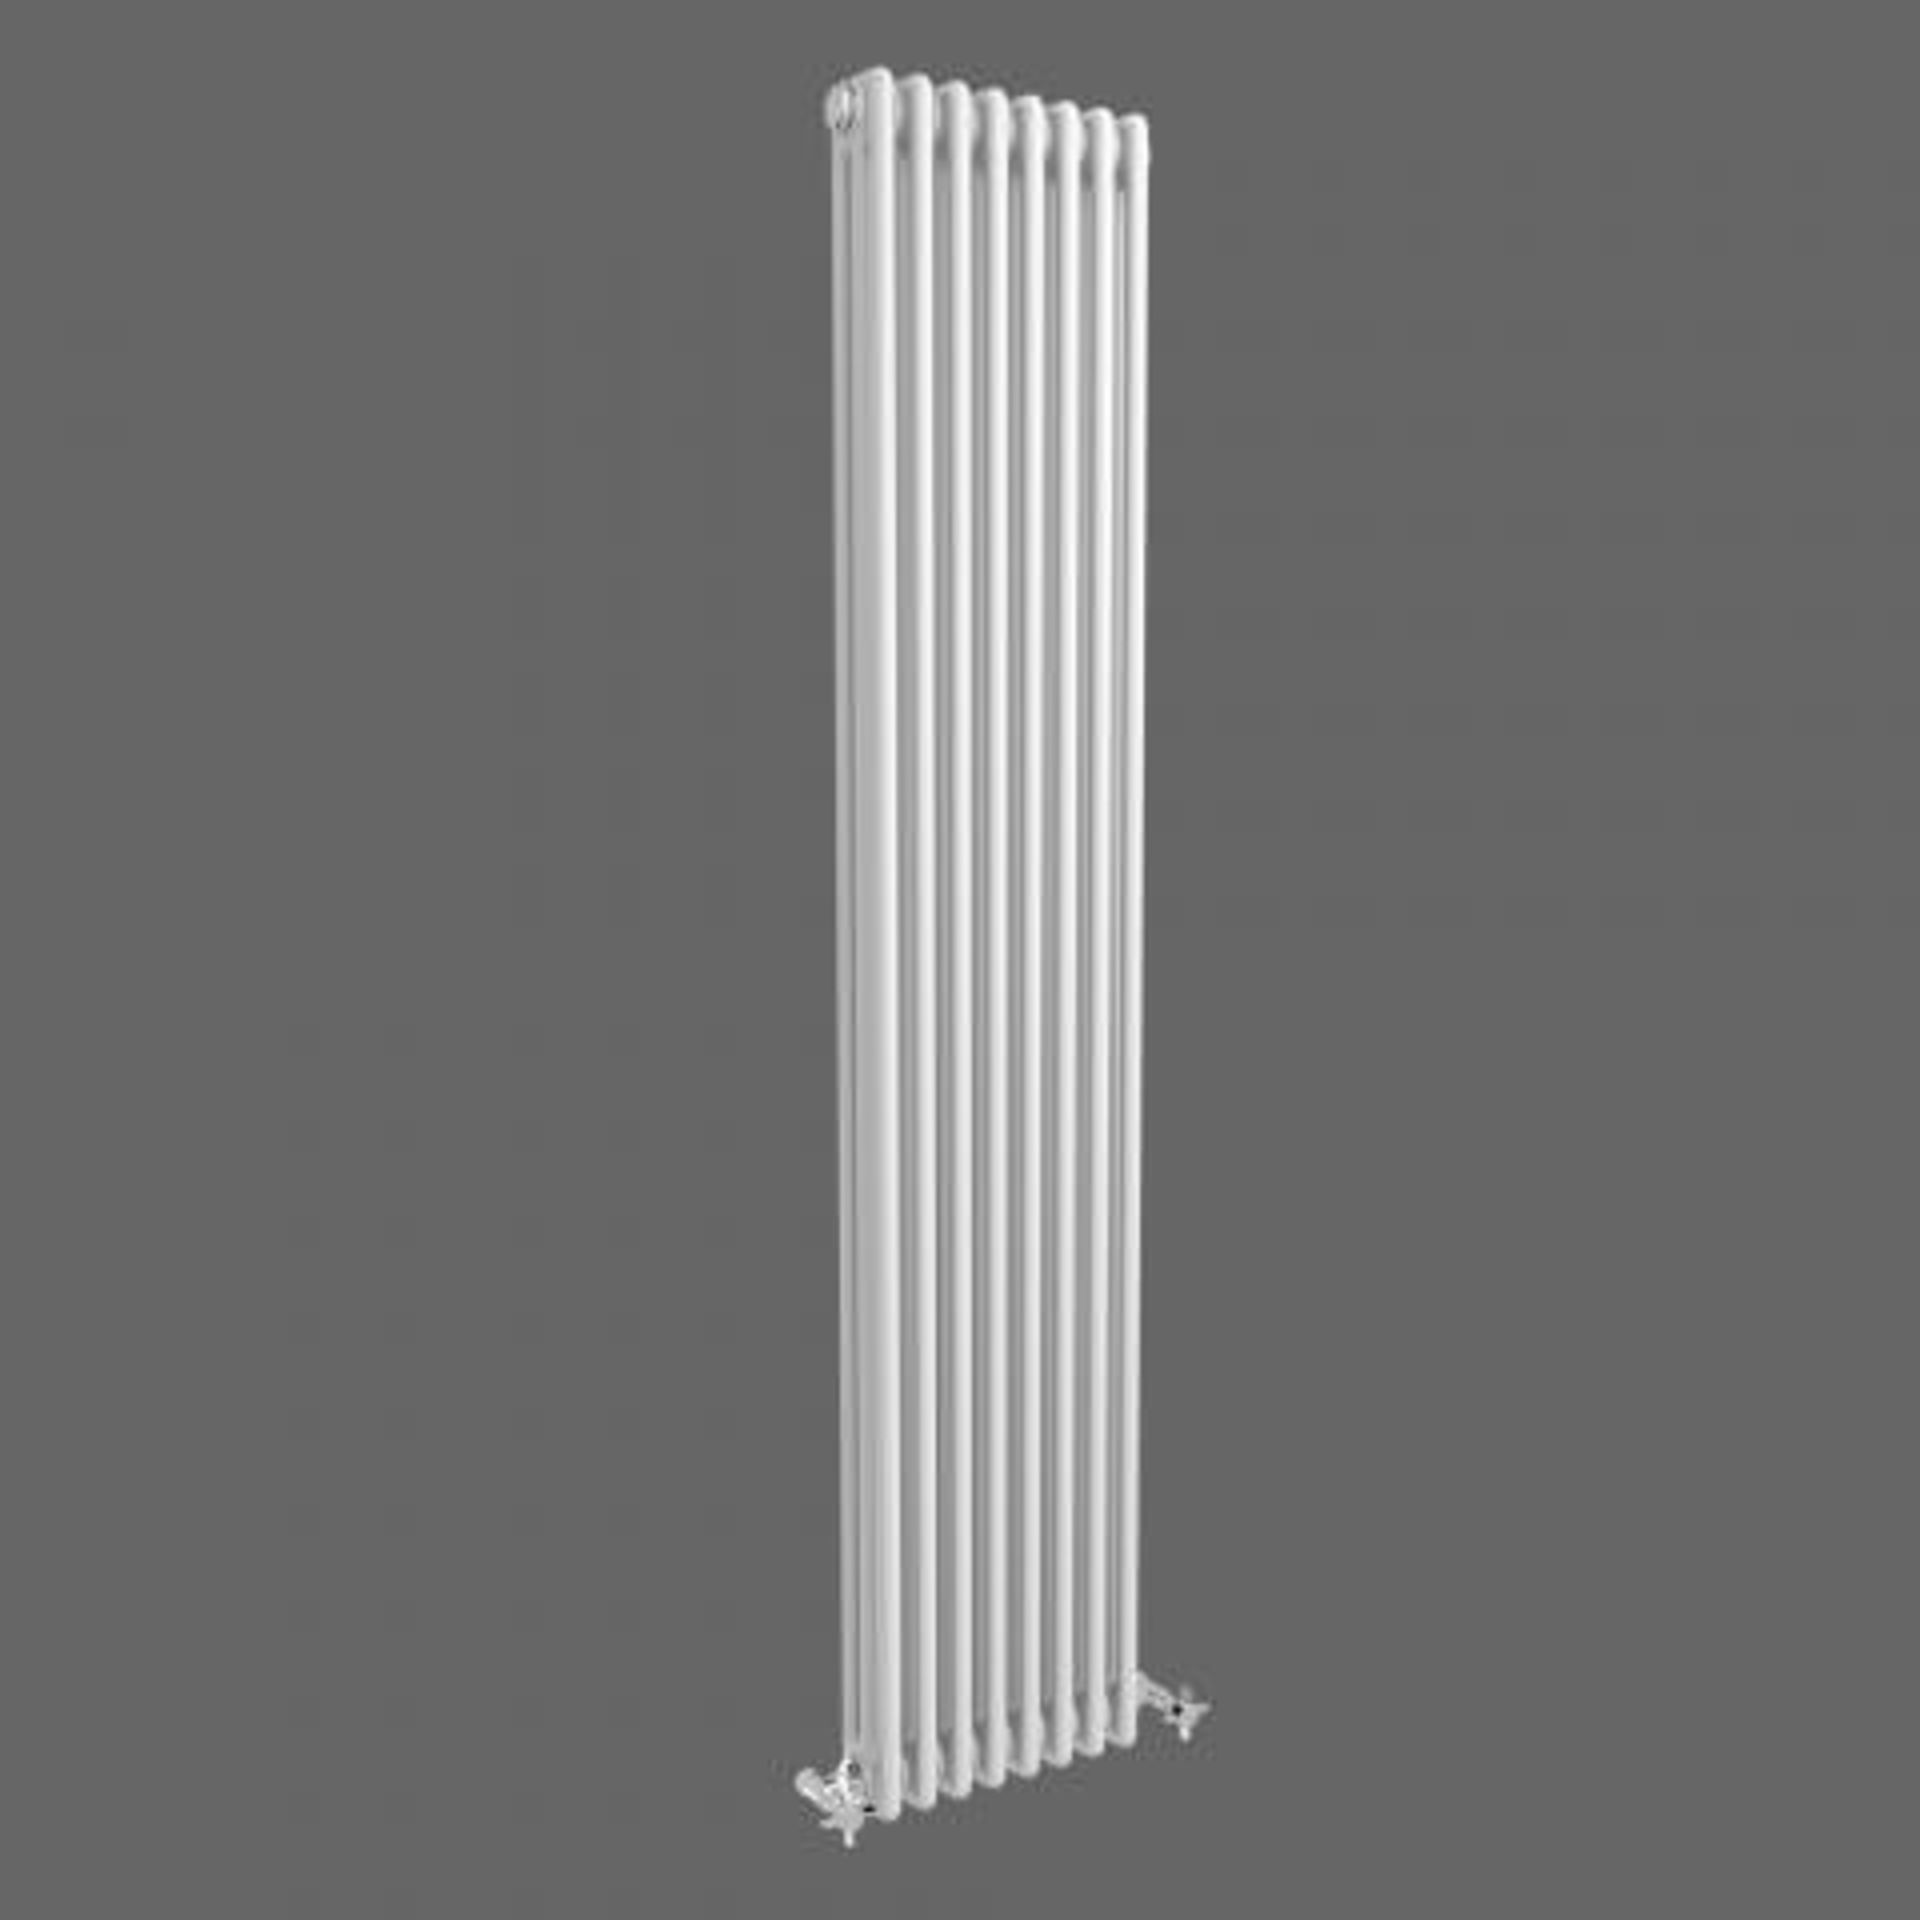 (W343) 1800x380mm White Triple Panel Vertical Colosseum Radiator RRP £451.99 For an elegant style, - Image 3 of 3